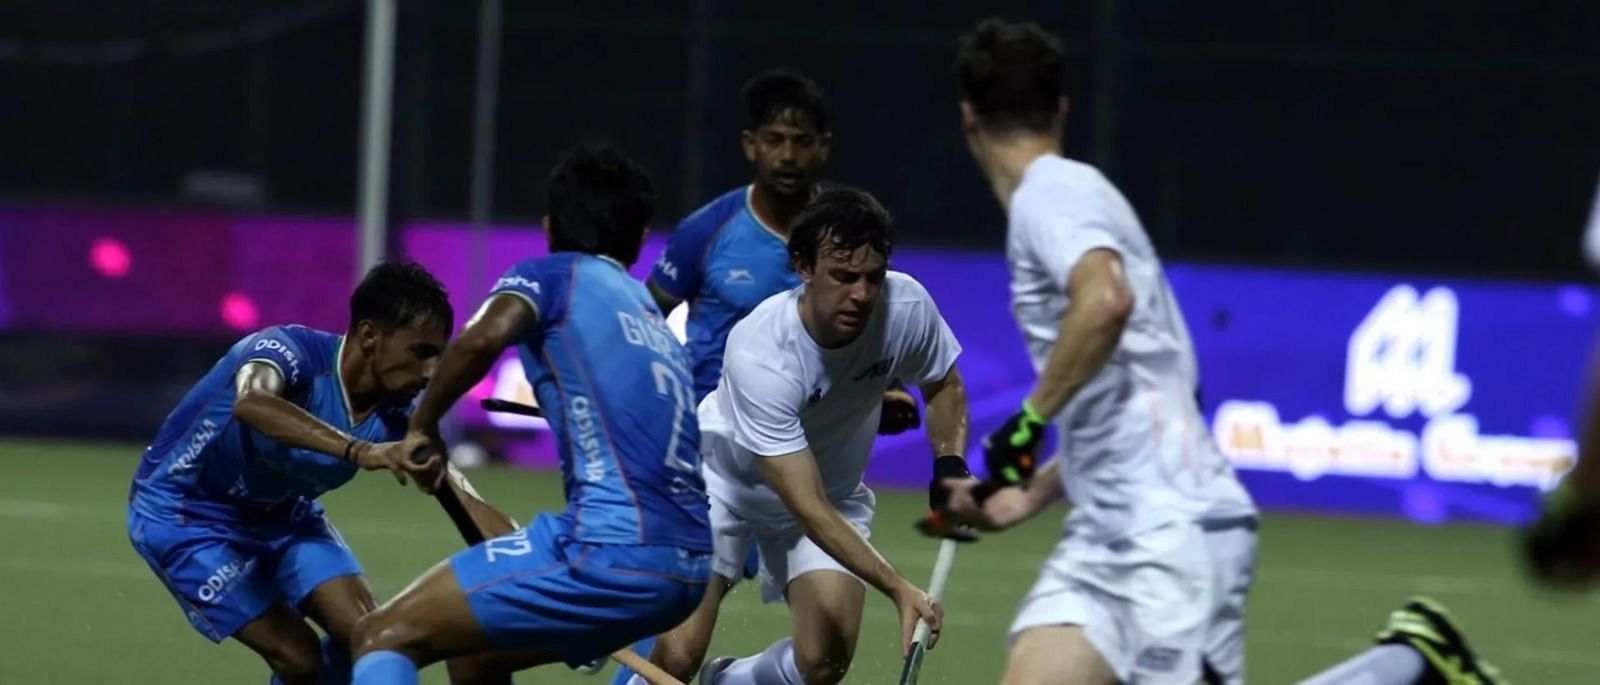 Indian Junior Hockey Team in action against New Zealand (Image Credits: Hockey India)